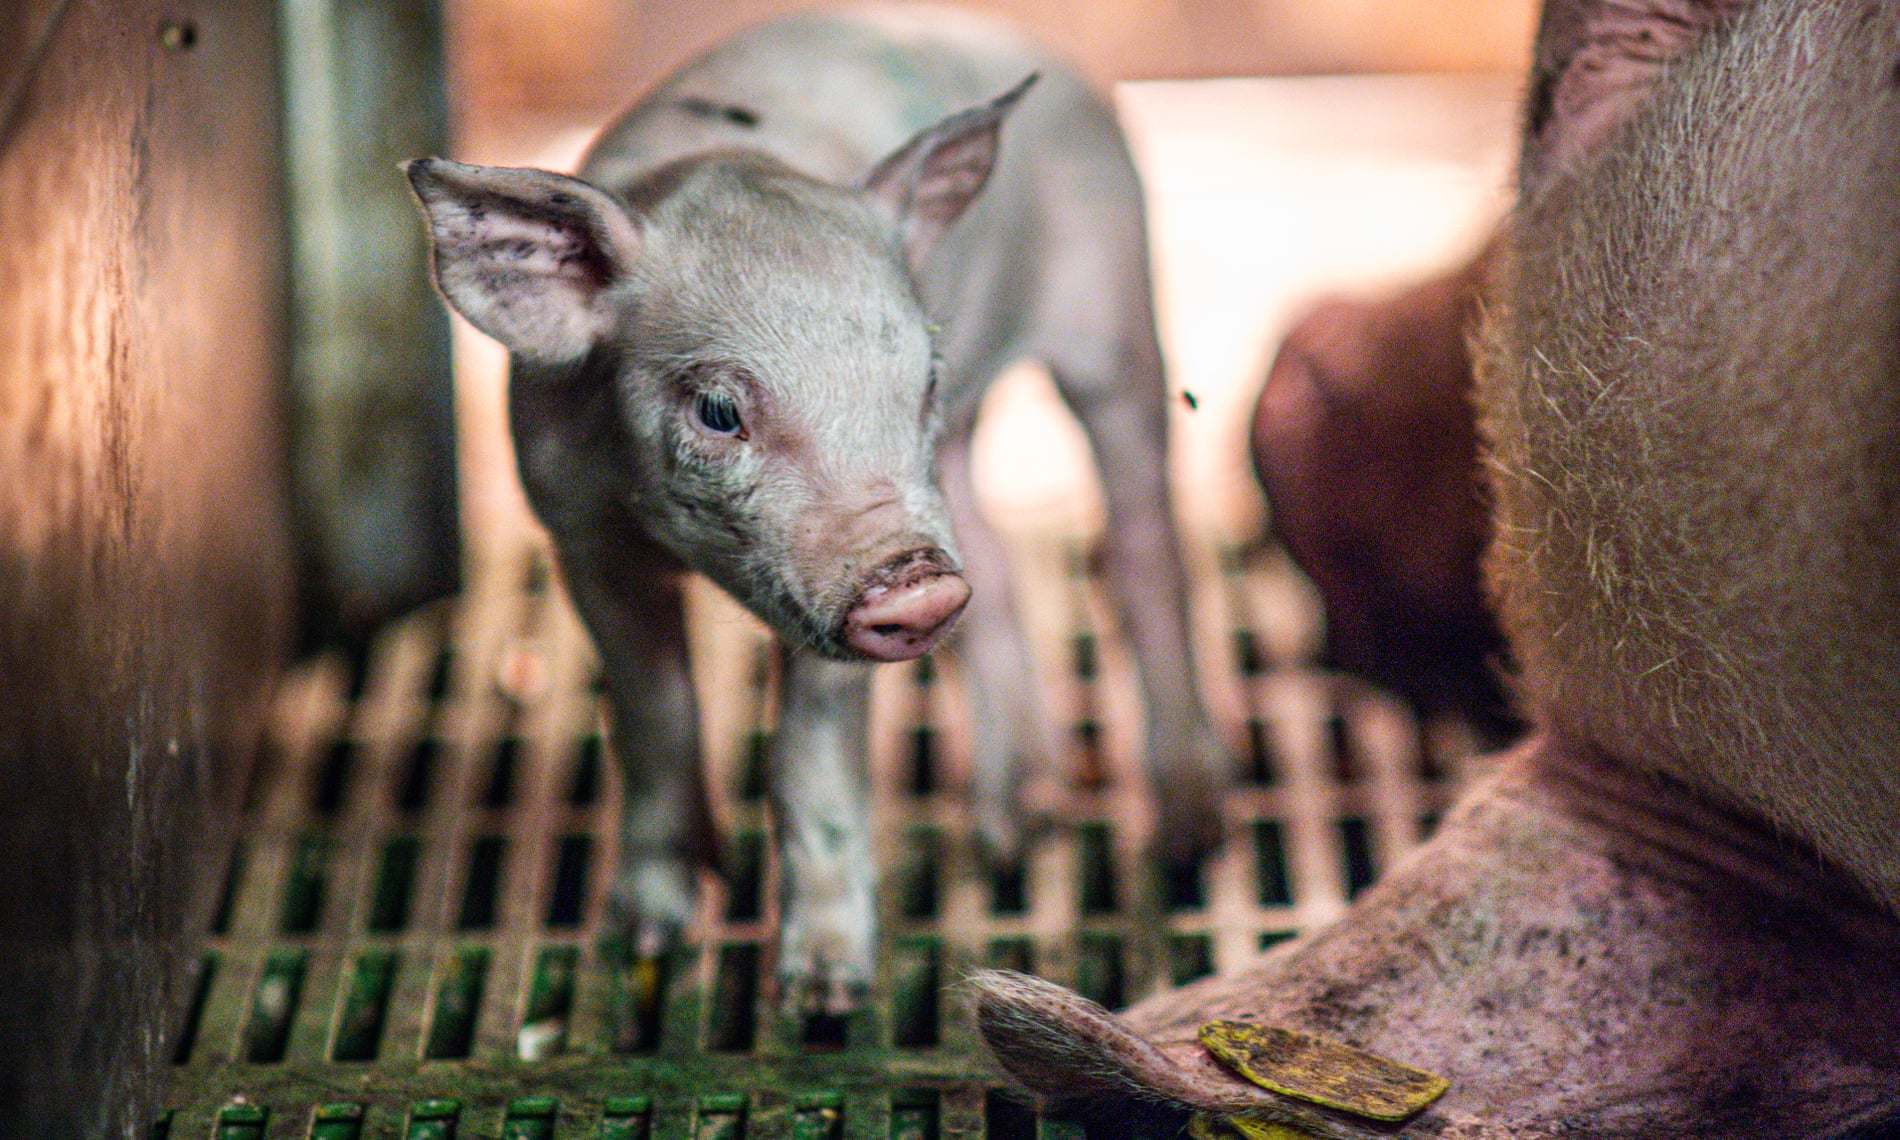 A sow and piglet in a sow stall, Italy, 2015